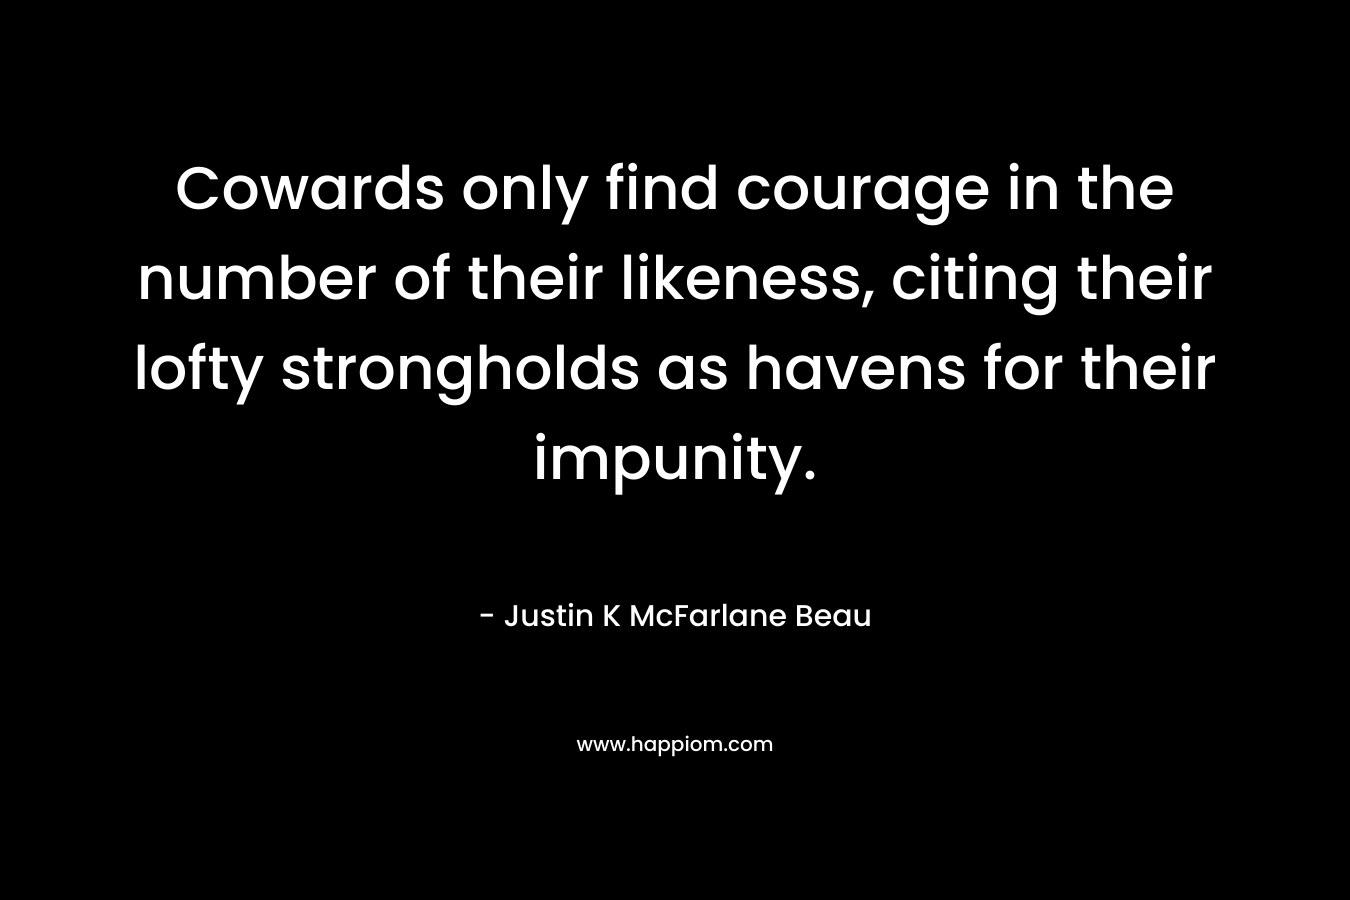 Cowards only find courage in the number of their likeness, citing their lofty strongholds as havens for their impunity. – Justin K McFarlane Beau